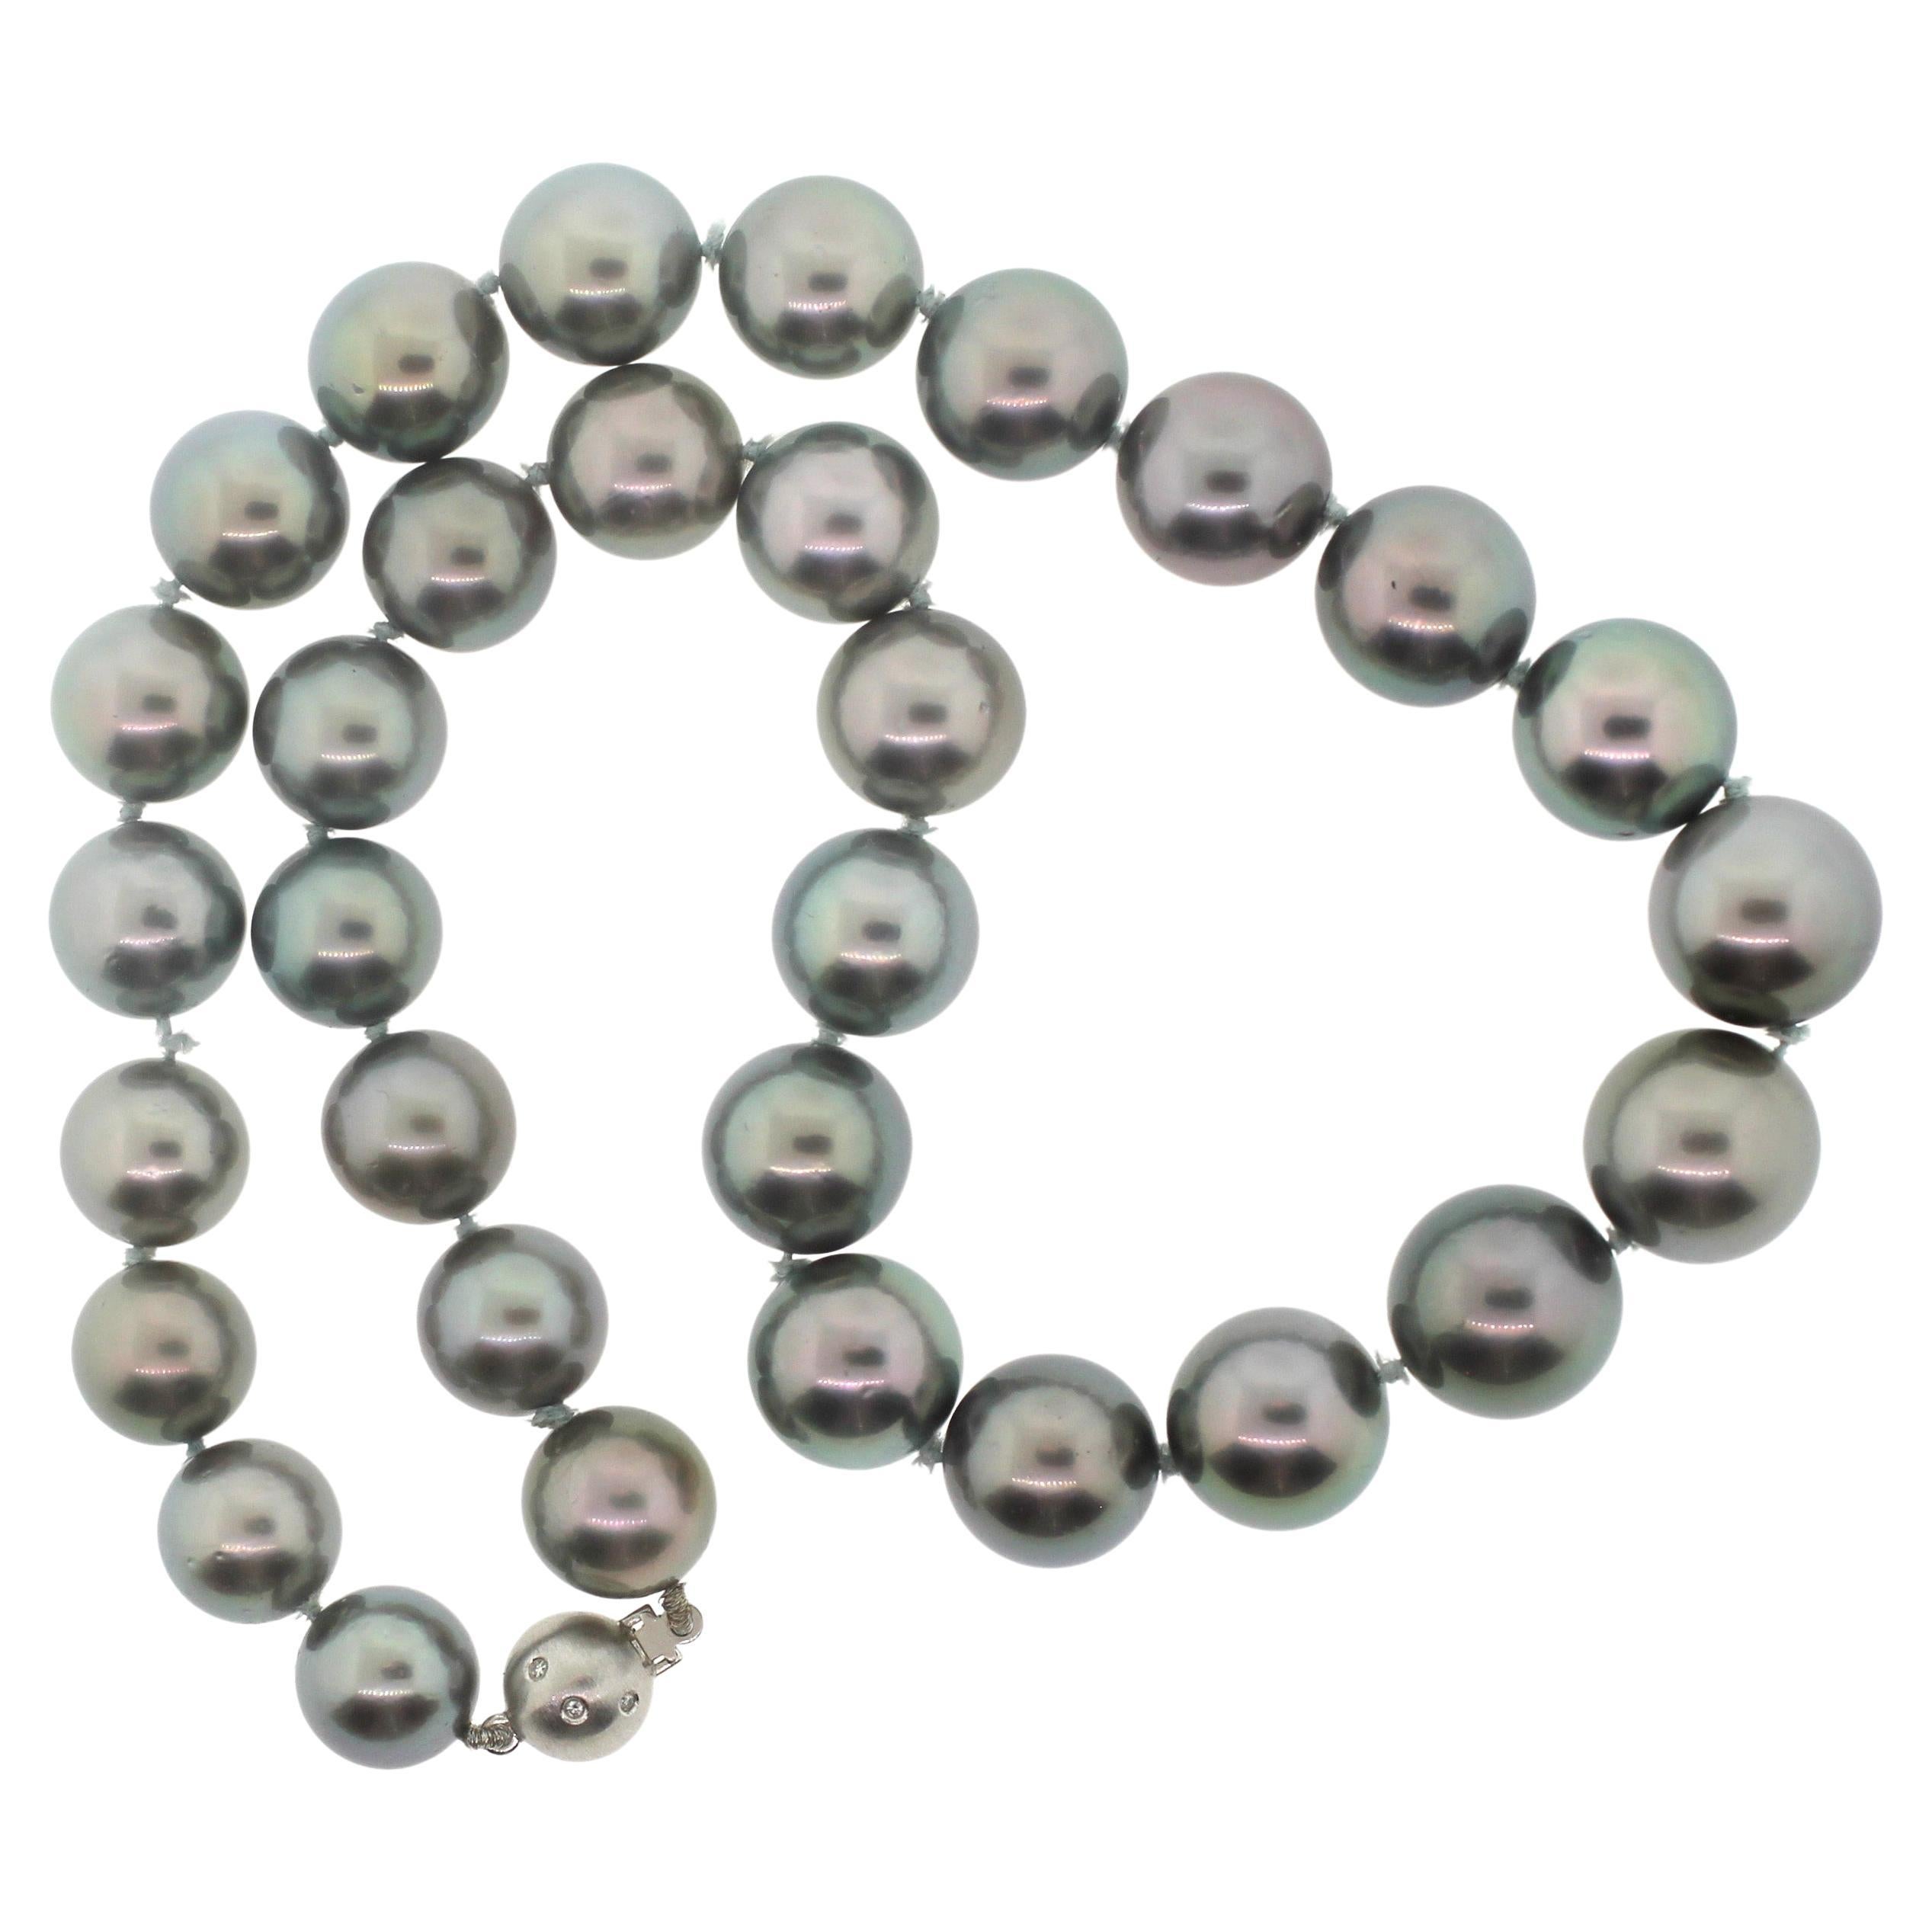 Hakimoto By Jewel Of Ocean 18K South Sea Strand Necklace
18K White Gold  With Diamonds
Weight (g): 82.3
Cultured Tahitian South Sea Pearl 
Pearl Size: 13X11mm 
Pearl Shape: Round 
Body color: Silver Gray
Orient: Very Good
Luster: Very Good 
Surface: